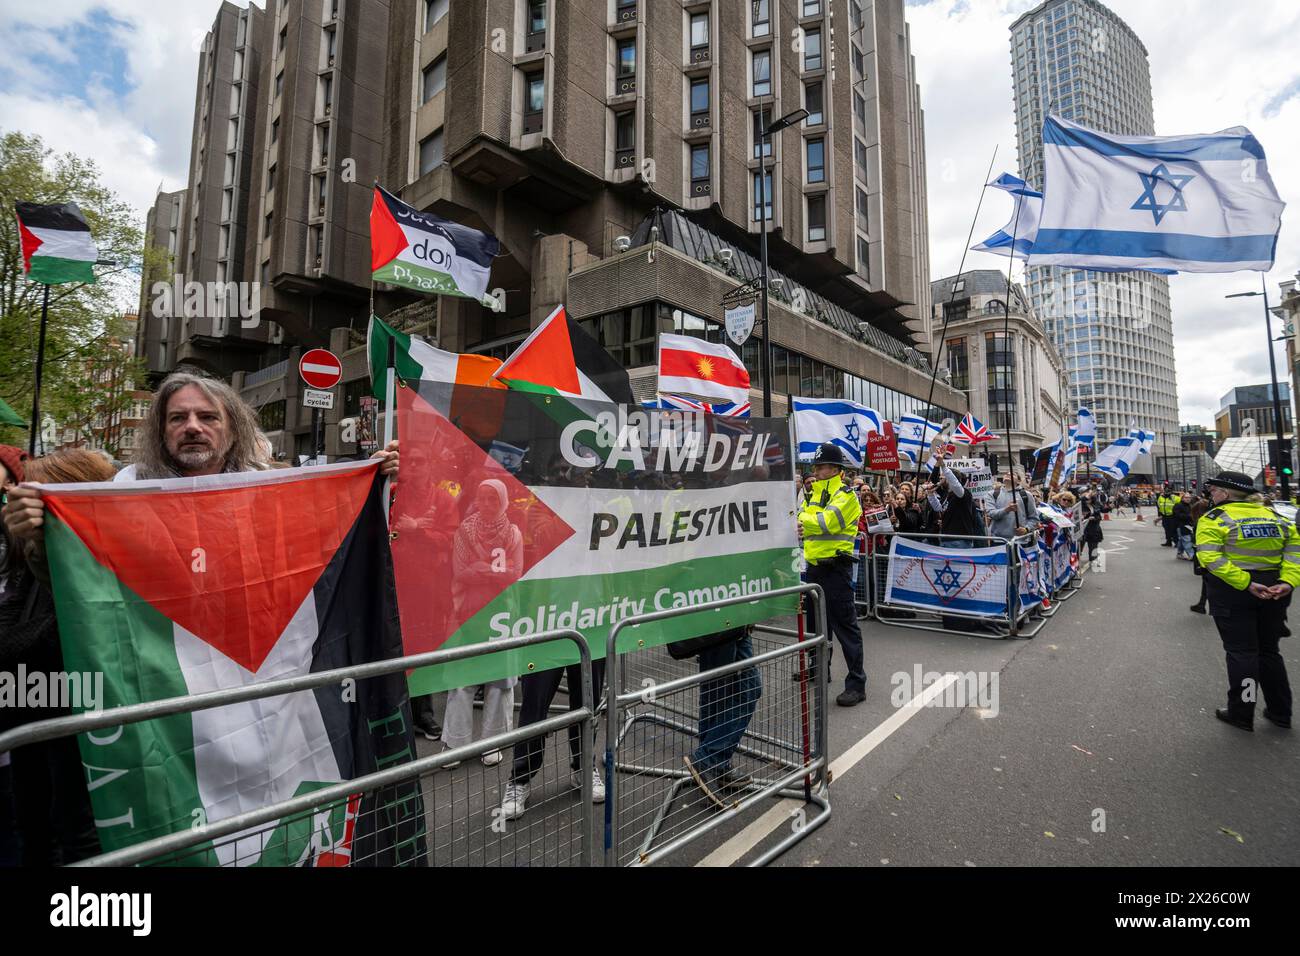 London, UK.  20 April 2024.  (R) Pro Israel supporters stage a counter-protest at the same time as Pro-Palestine supporters demonstrating outside Barclays bank on Tottenham Court Road as the Israel - Hamas war continues in Gaza.  The police watch on and keeps the two groups apart.  Credit: Stephen Chung / Alamy Live News Stock Photo